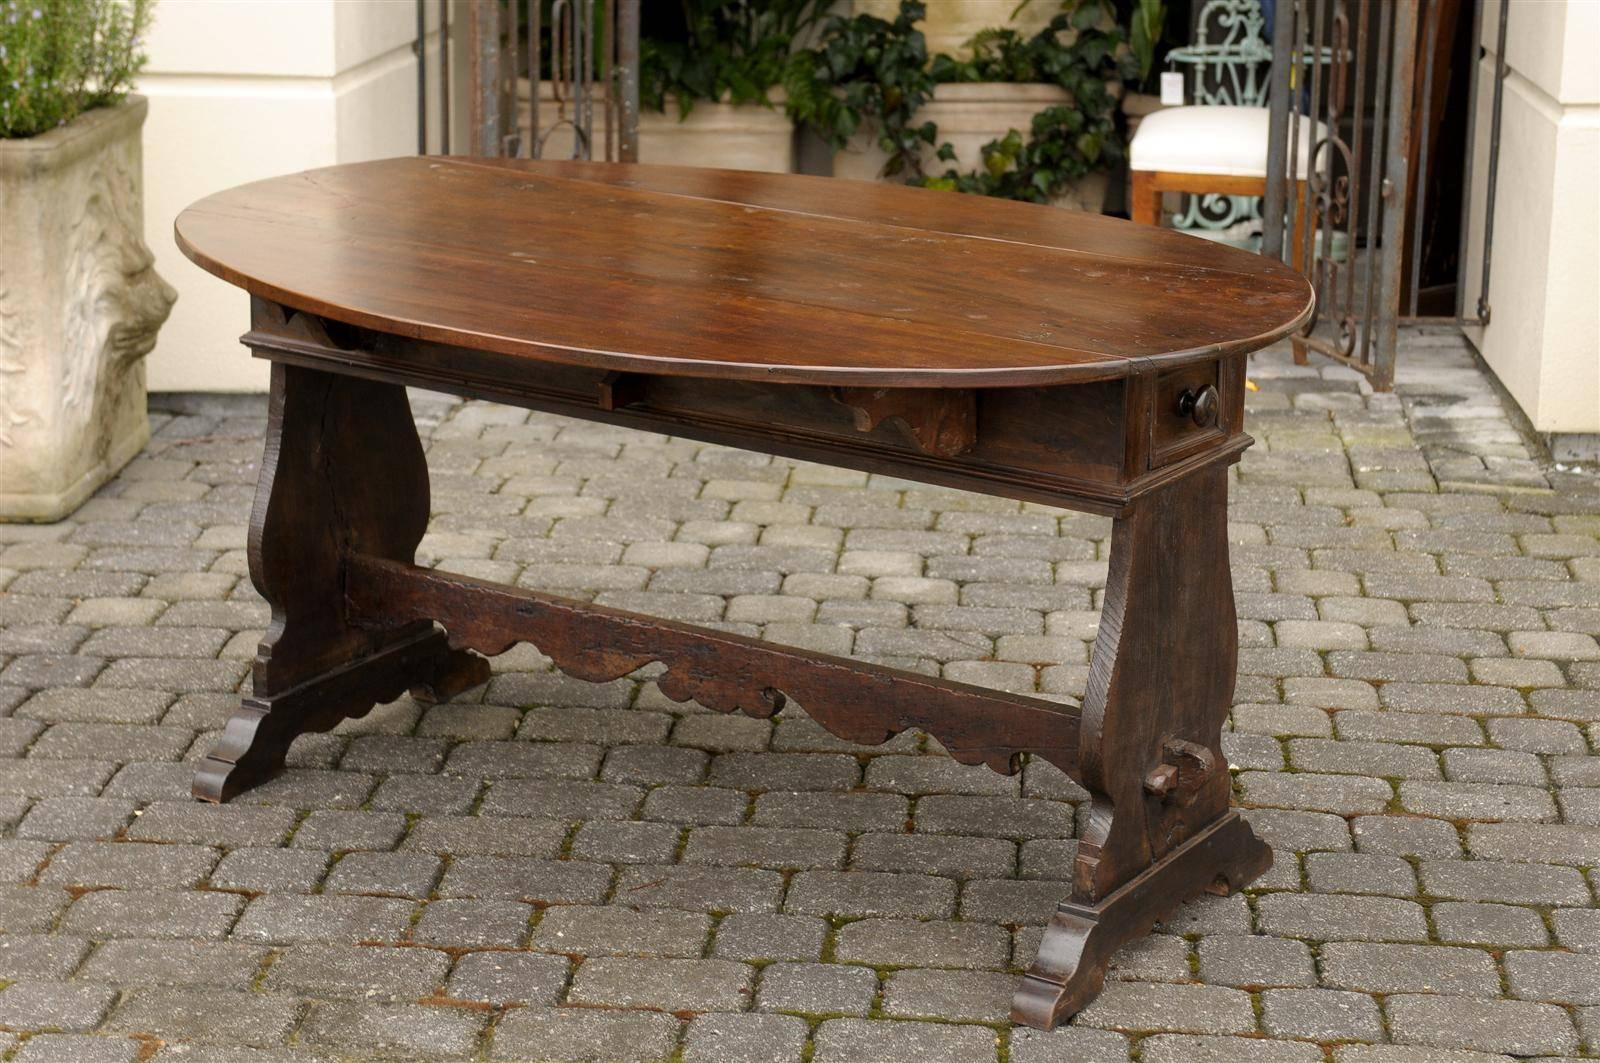 Oval Italian Walnut Drop-Leaf Table from the Late 18th Century with Trestle Base 2